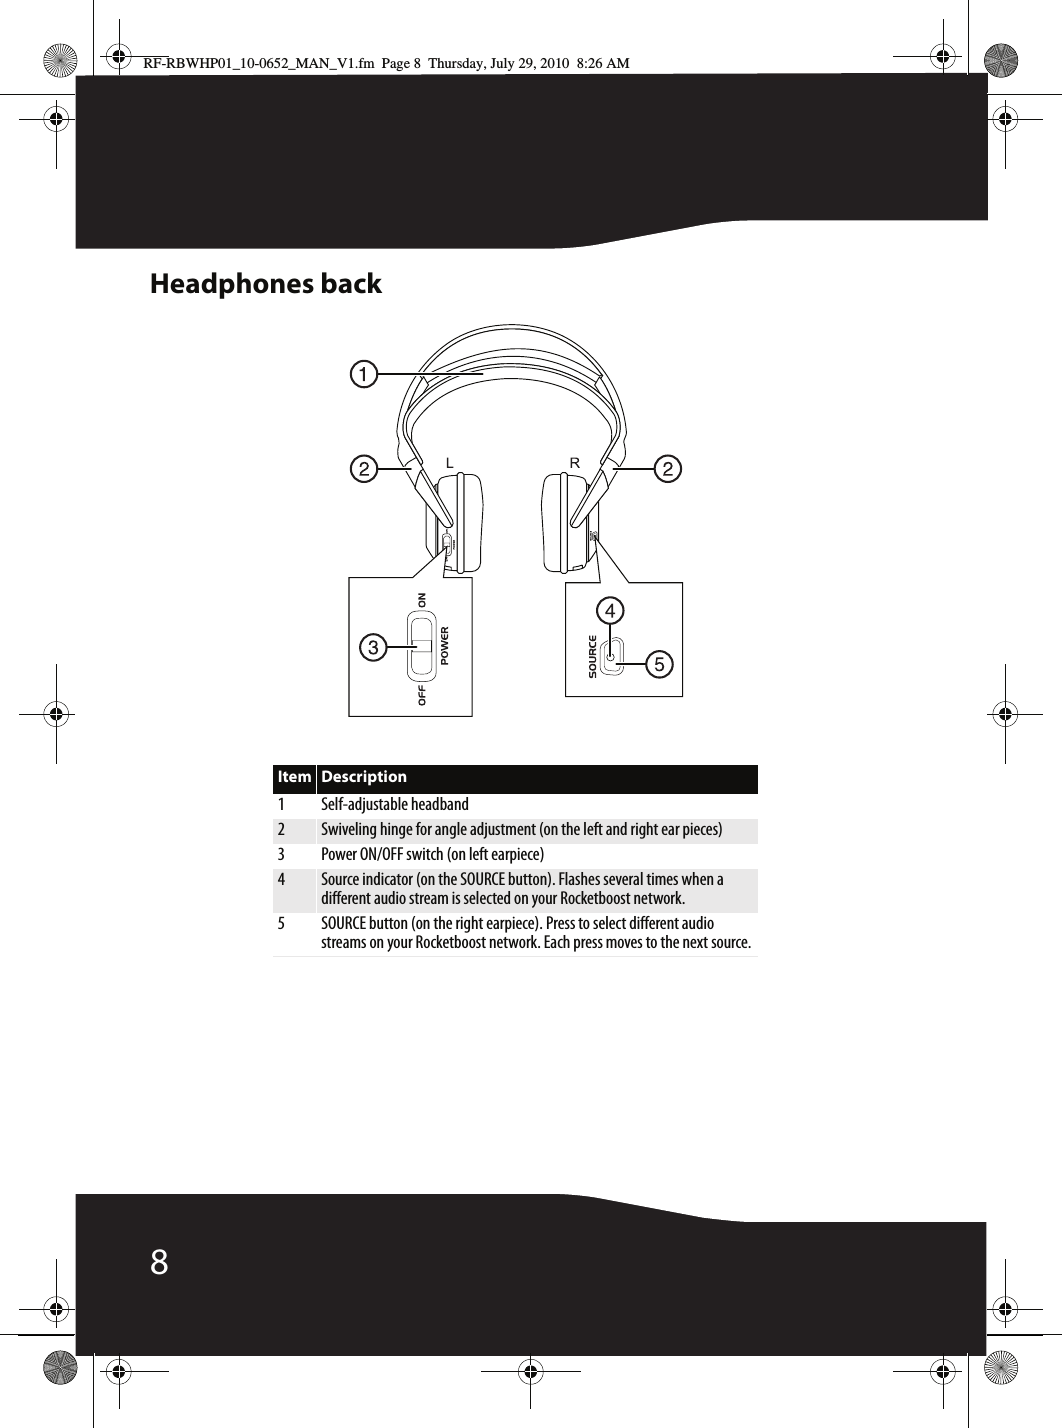 8Headphones backItem Description1 Self-adjustable headband2Swiveling hinge for angle adjustment (on the left and right ear pieces)3 Power ON/OFF switch (on left earpiece)4Source indicator (on the SOURCE button). Flashes several times when a different audio stream is selected on your Rocketboost network.5 SOURCE button (on the right earpiece). Press to select different audio streams on your Rocketboost network. Each press moves to the next source.RF-RBWHP01_10-0652_MAN_V1.fm  Page 8  Thursday, July 29, 2010  8:26 AM